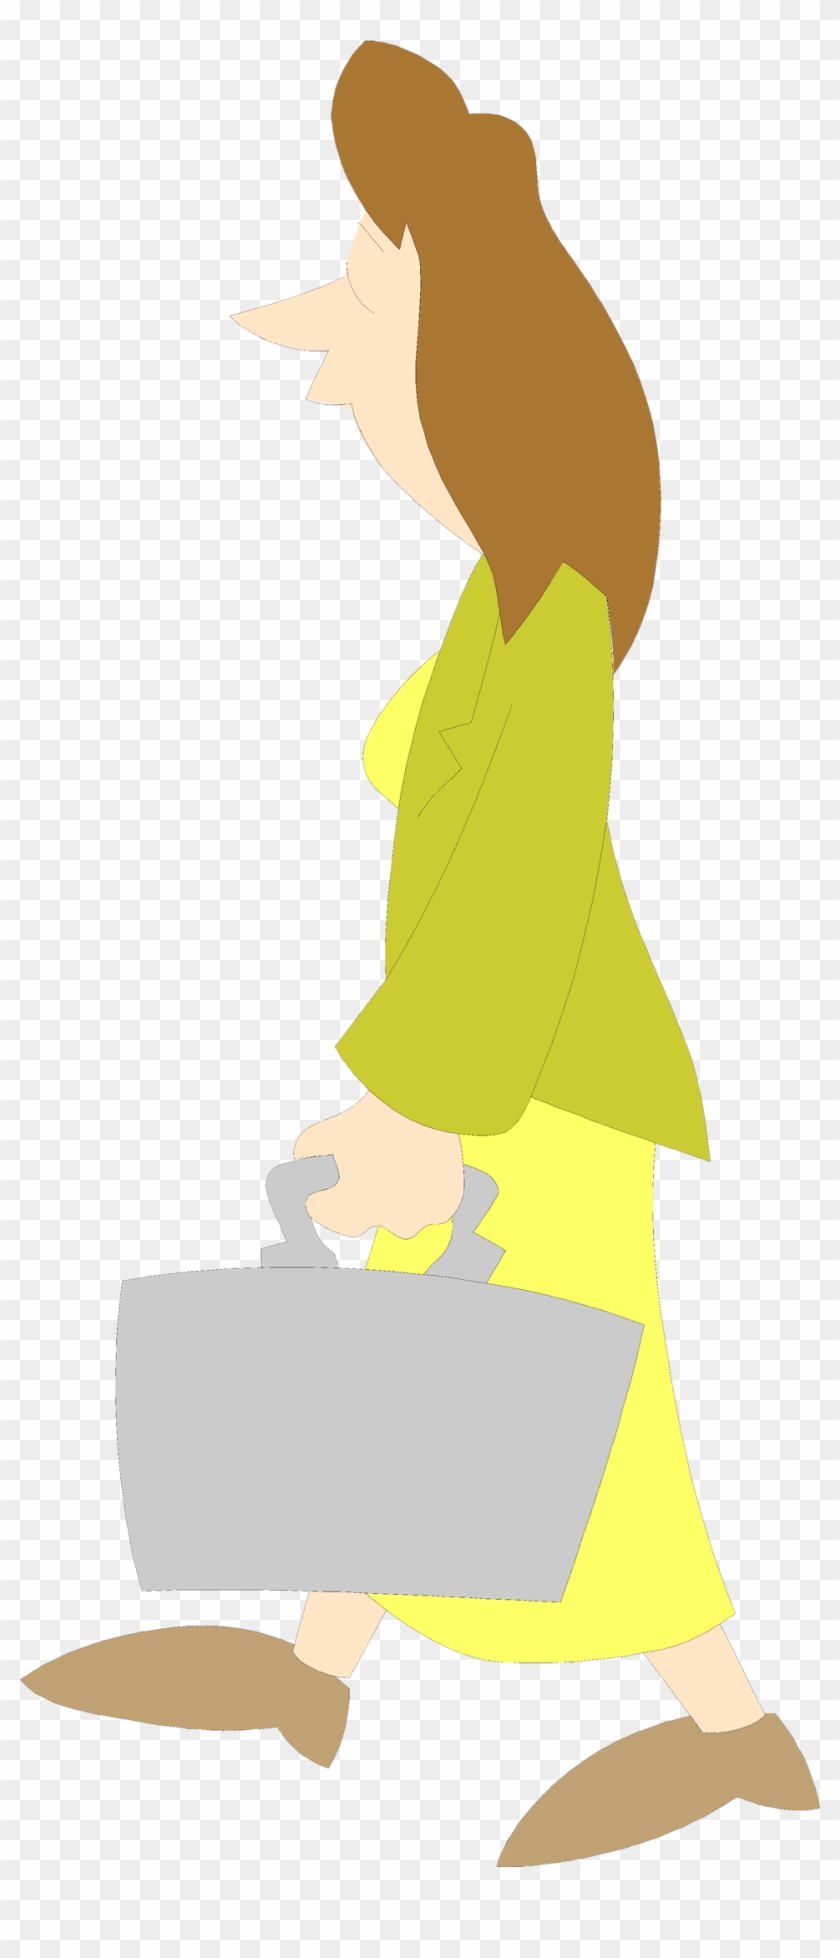 Illustration Of A Business Woman Carrying A Briefcase - Illustration #1160786